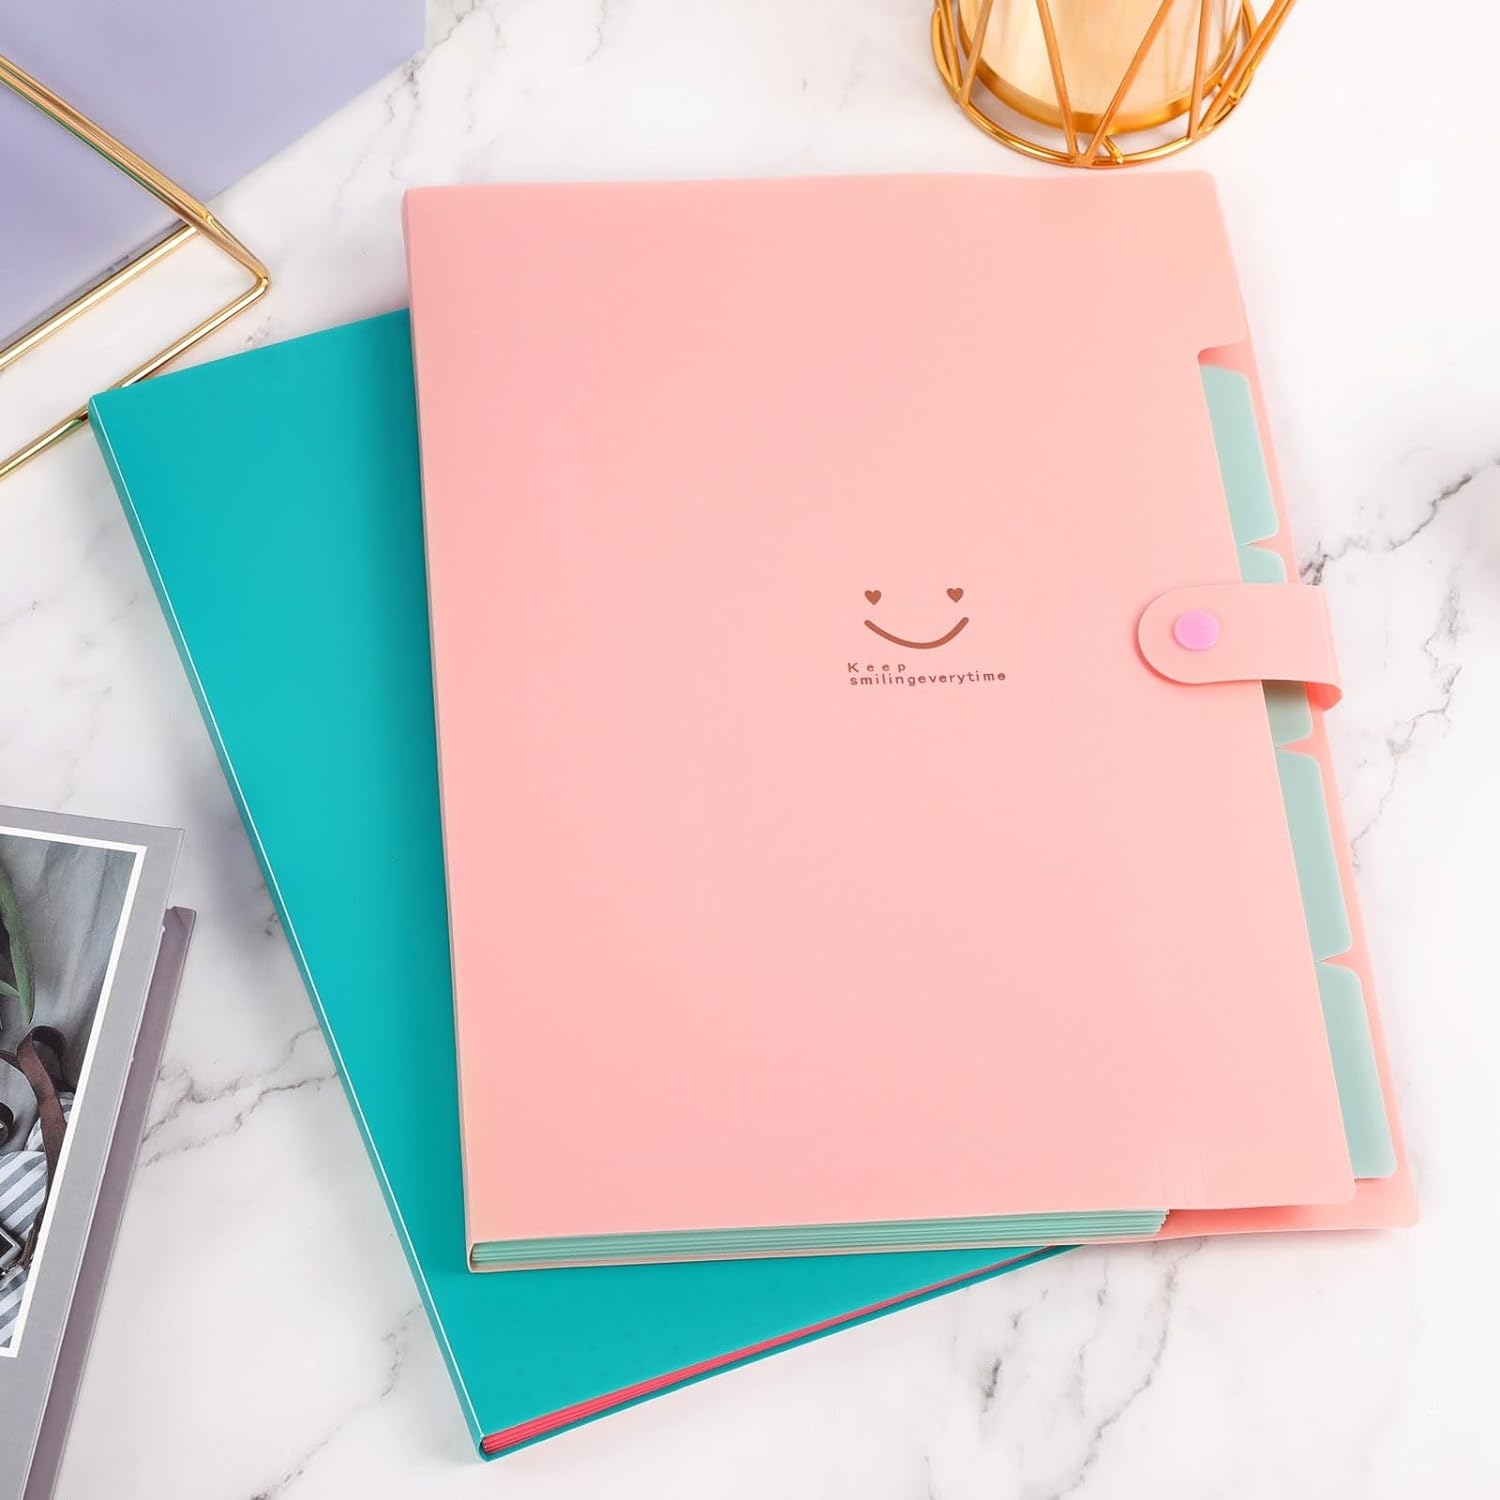 Two pastel binders with a smiling face design, one with a strap closure, on a marble surface